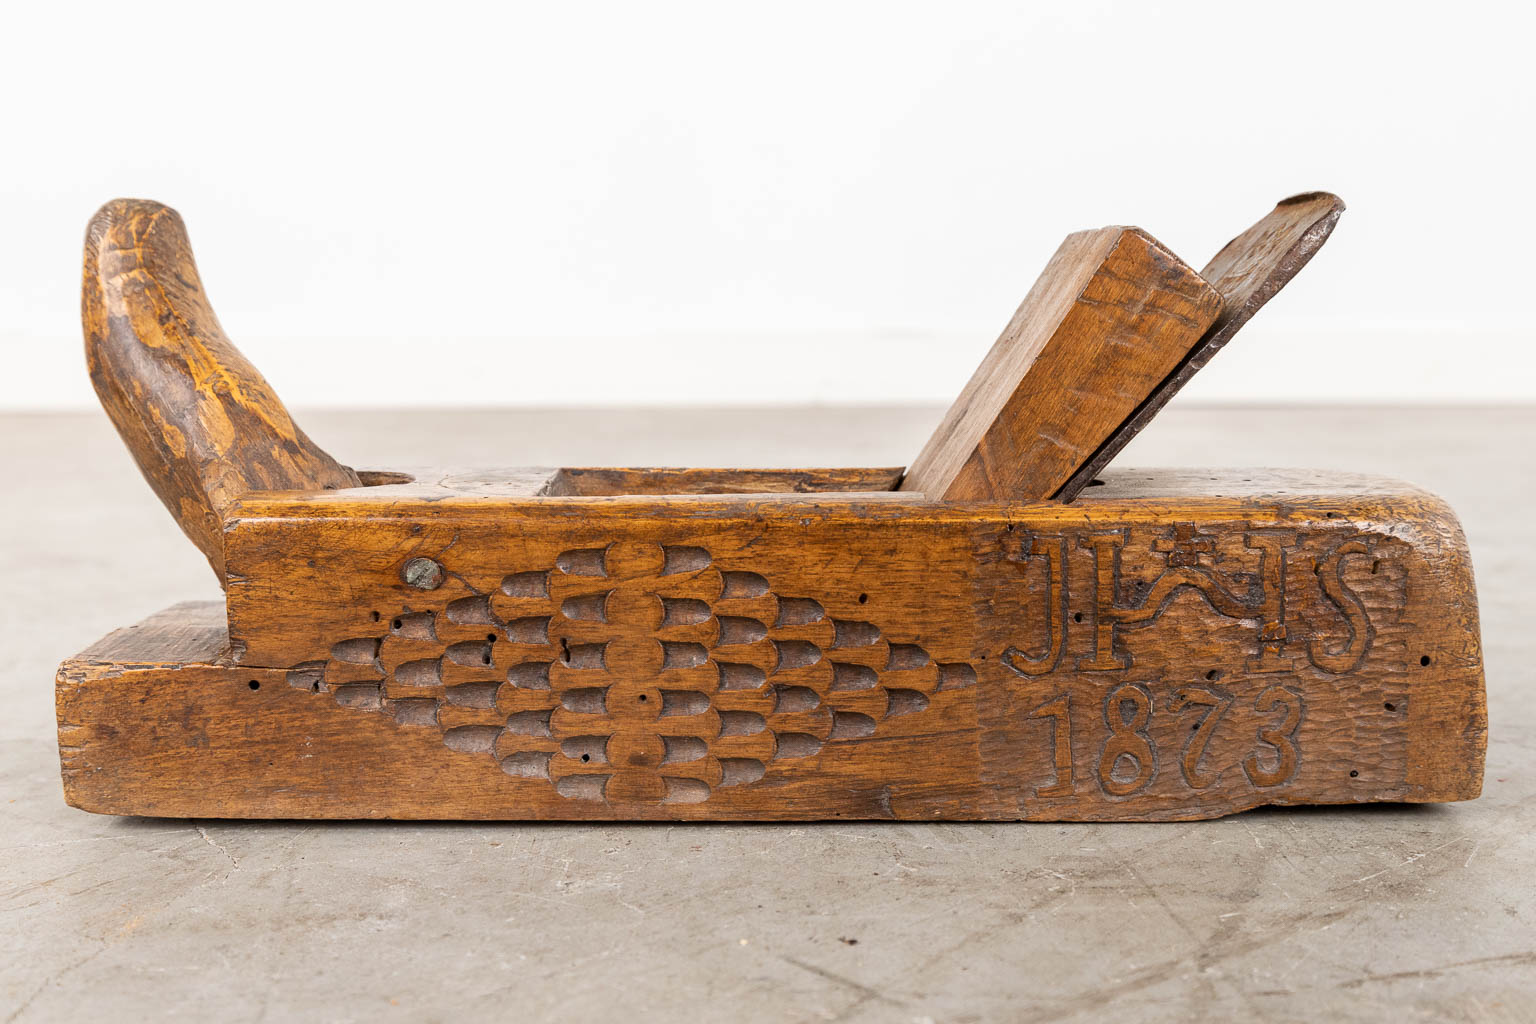 An antique collection of planers. 18th/19th C. (D:25 x W:34 x H:11 cm)